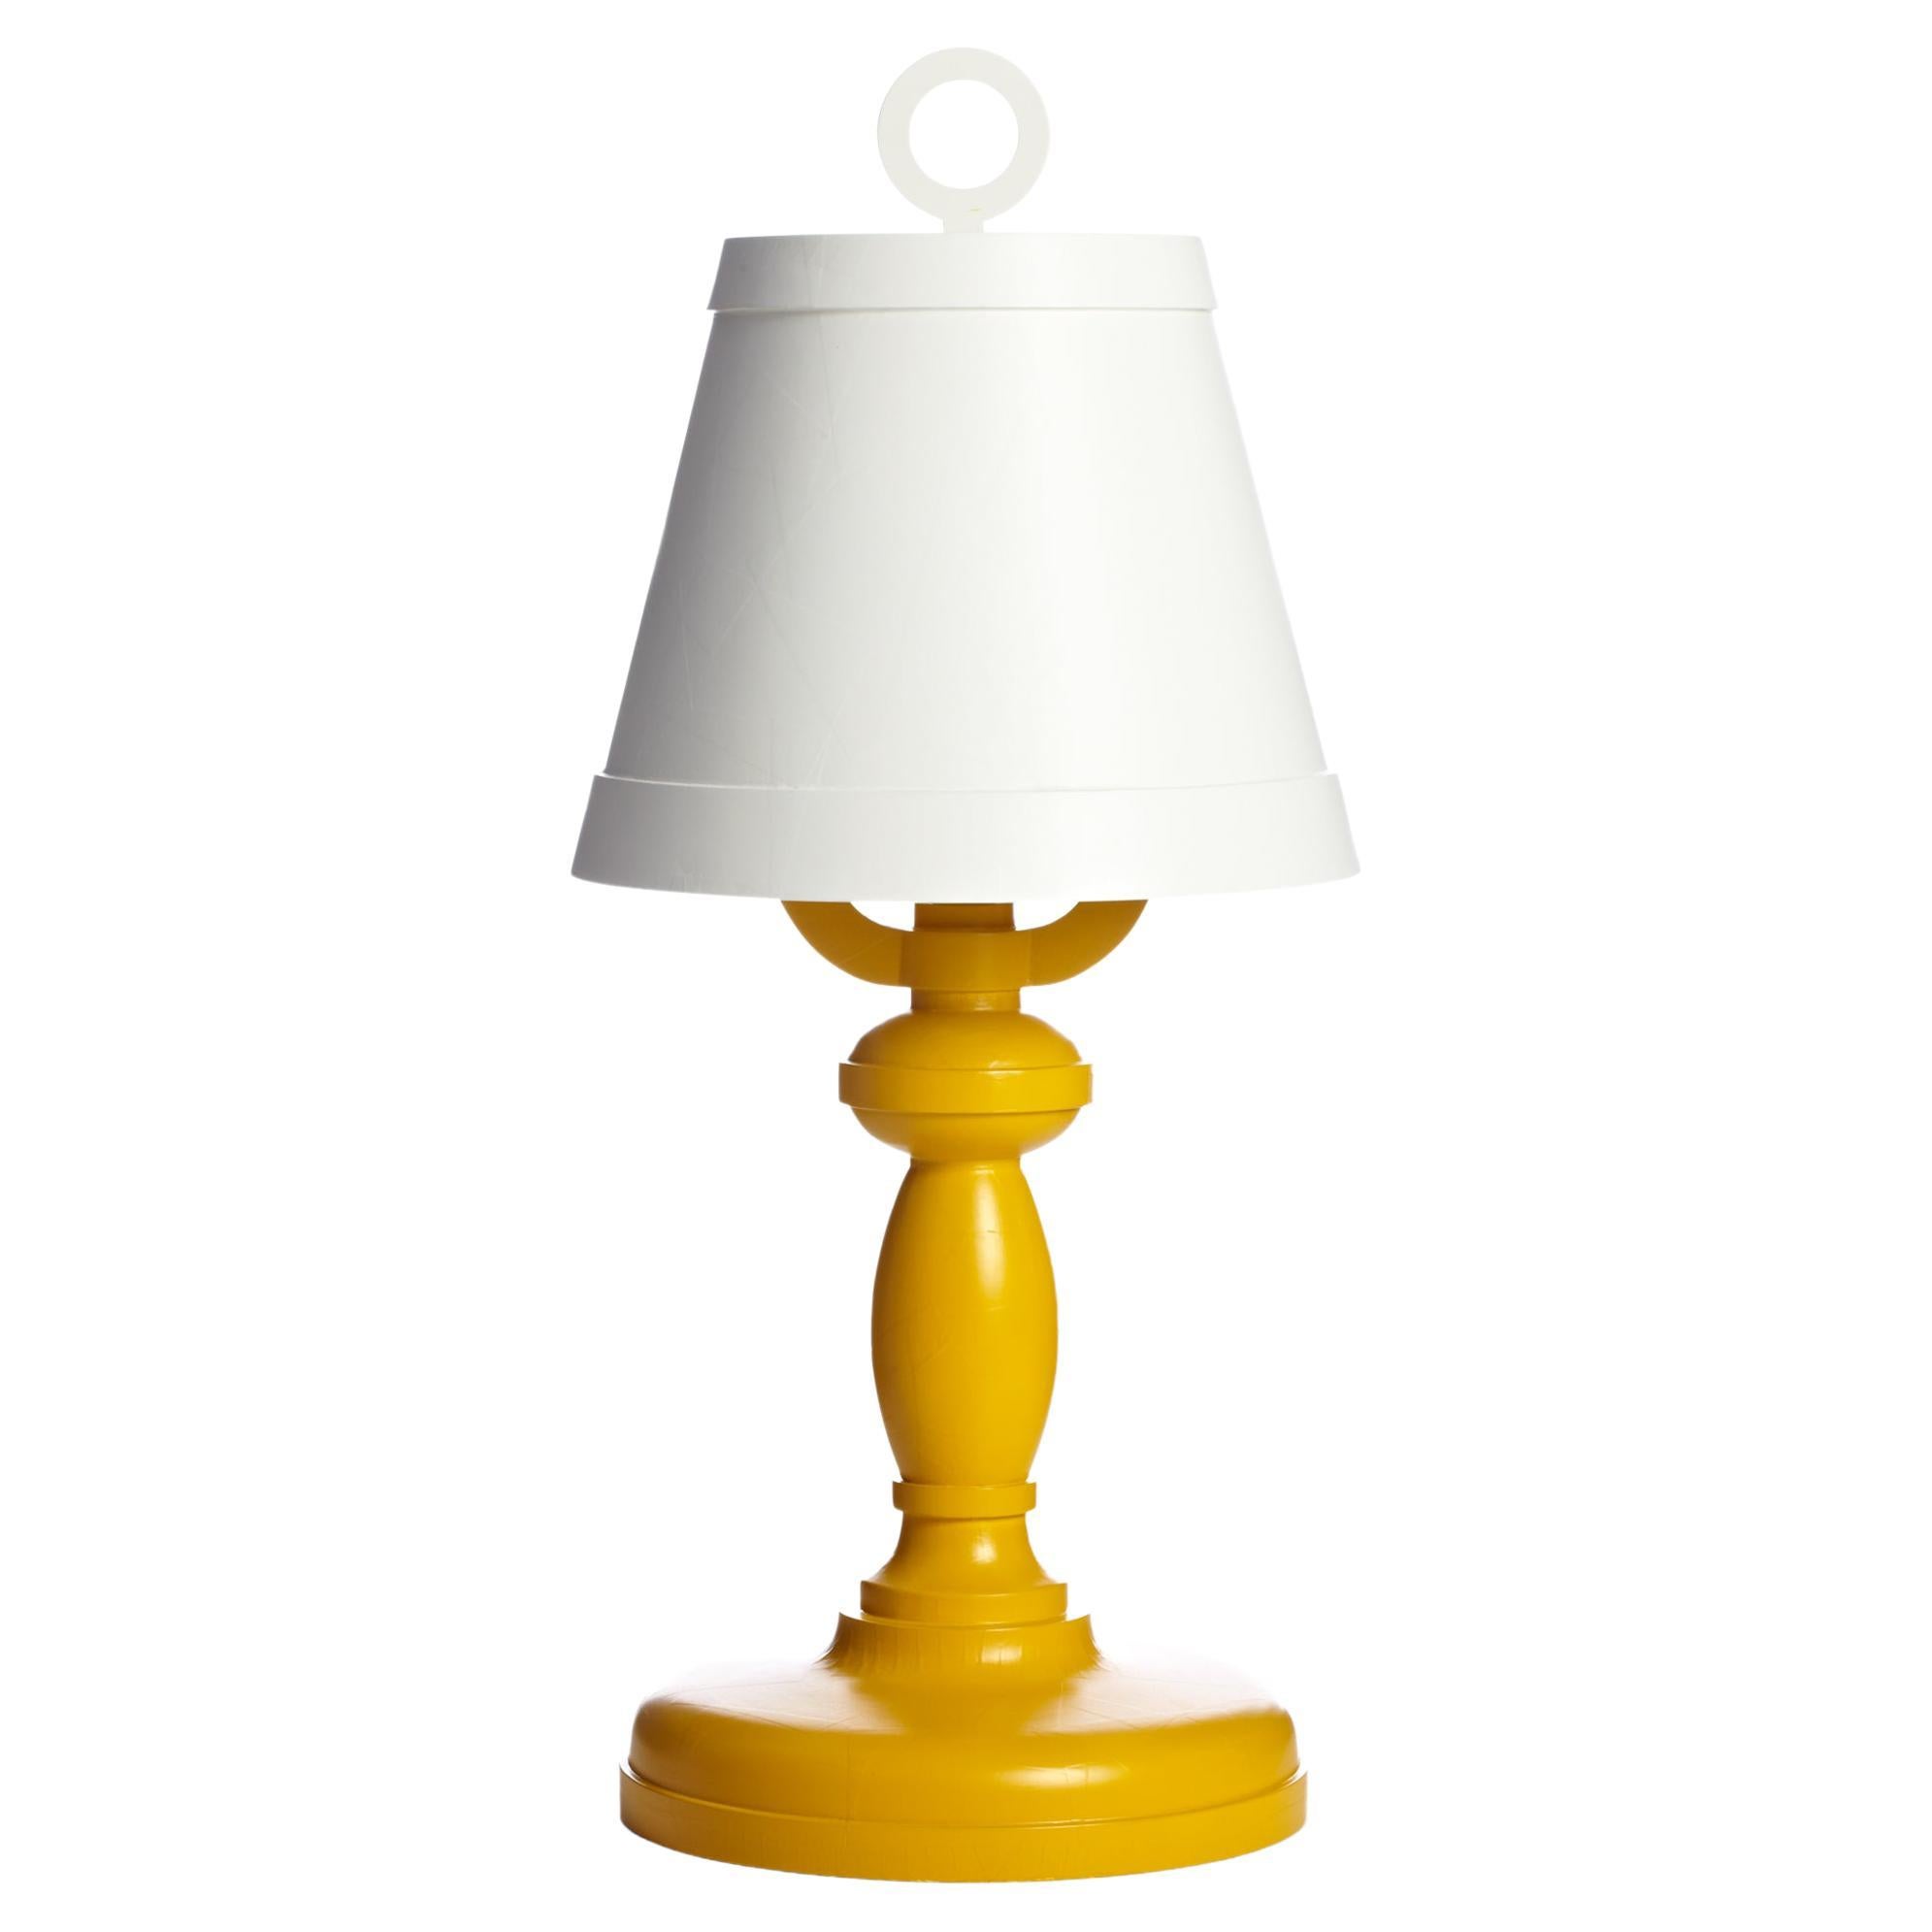 Moooi Paper Table Lamp In White Shade